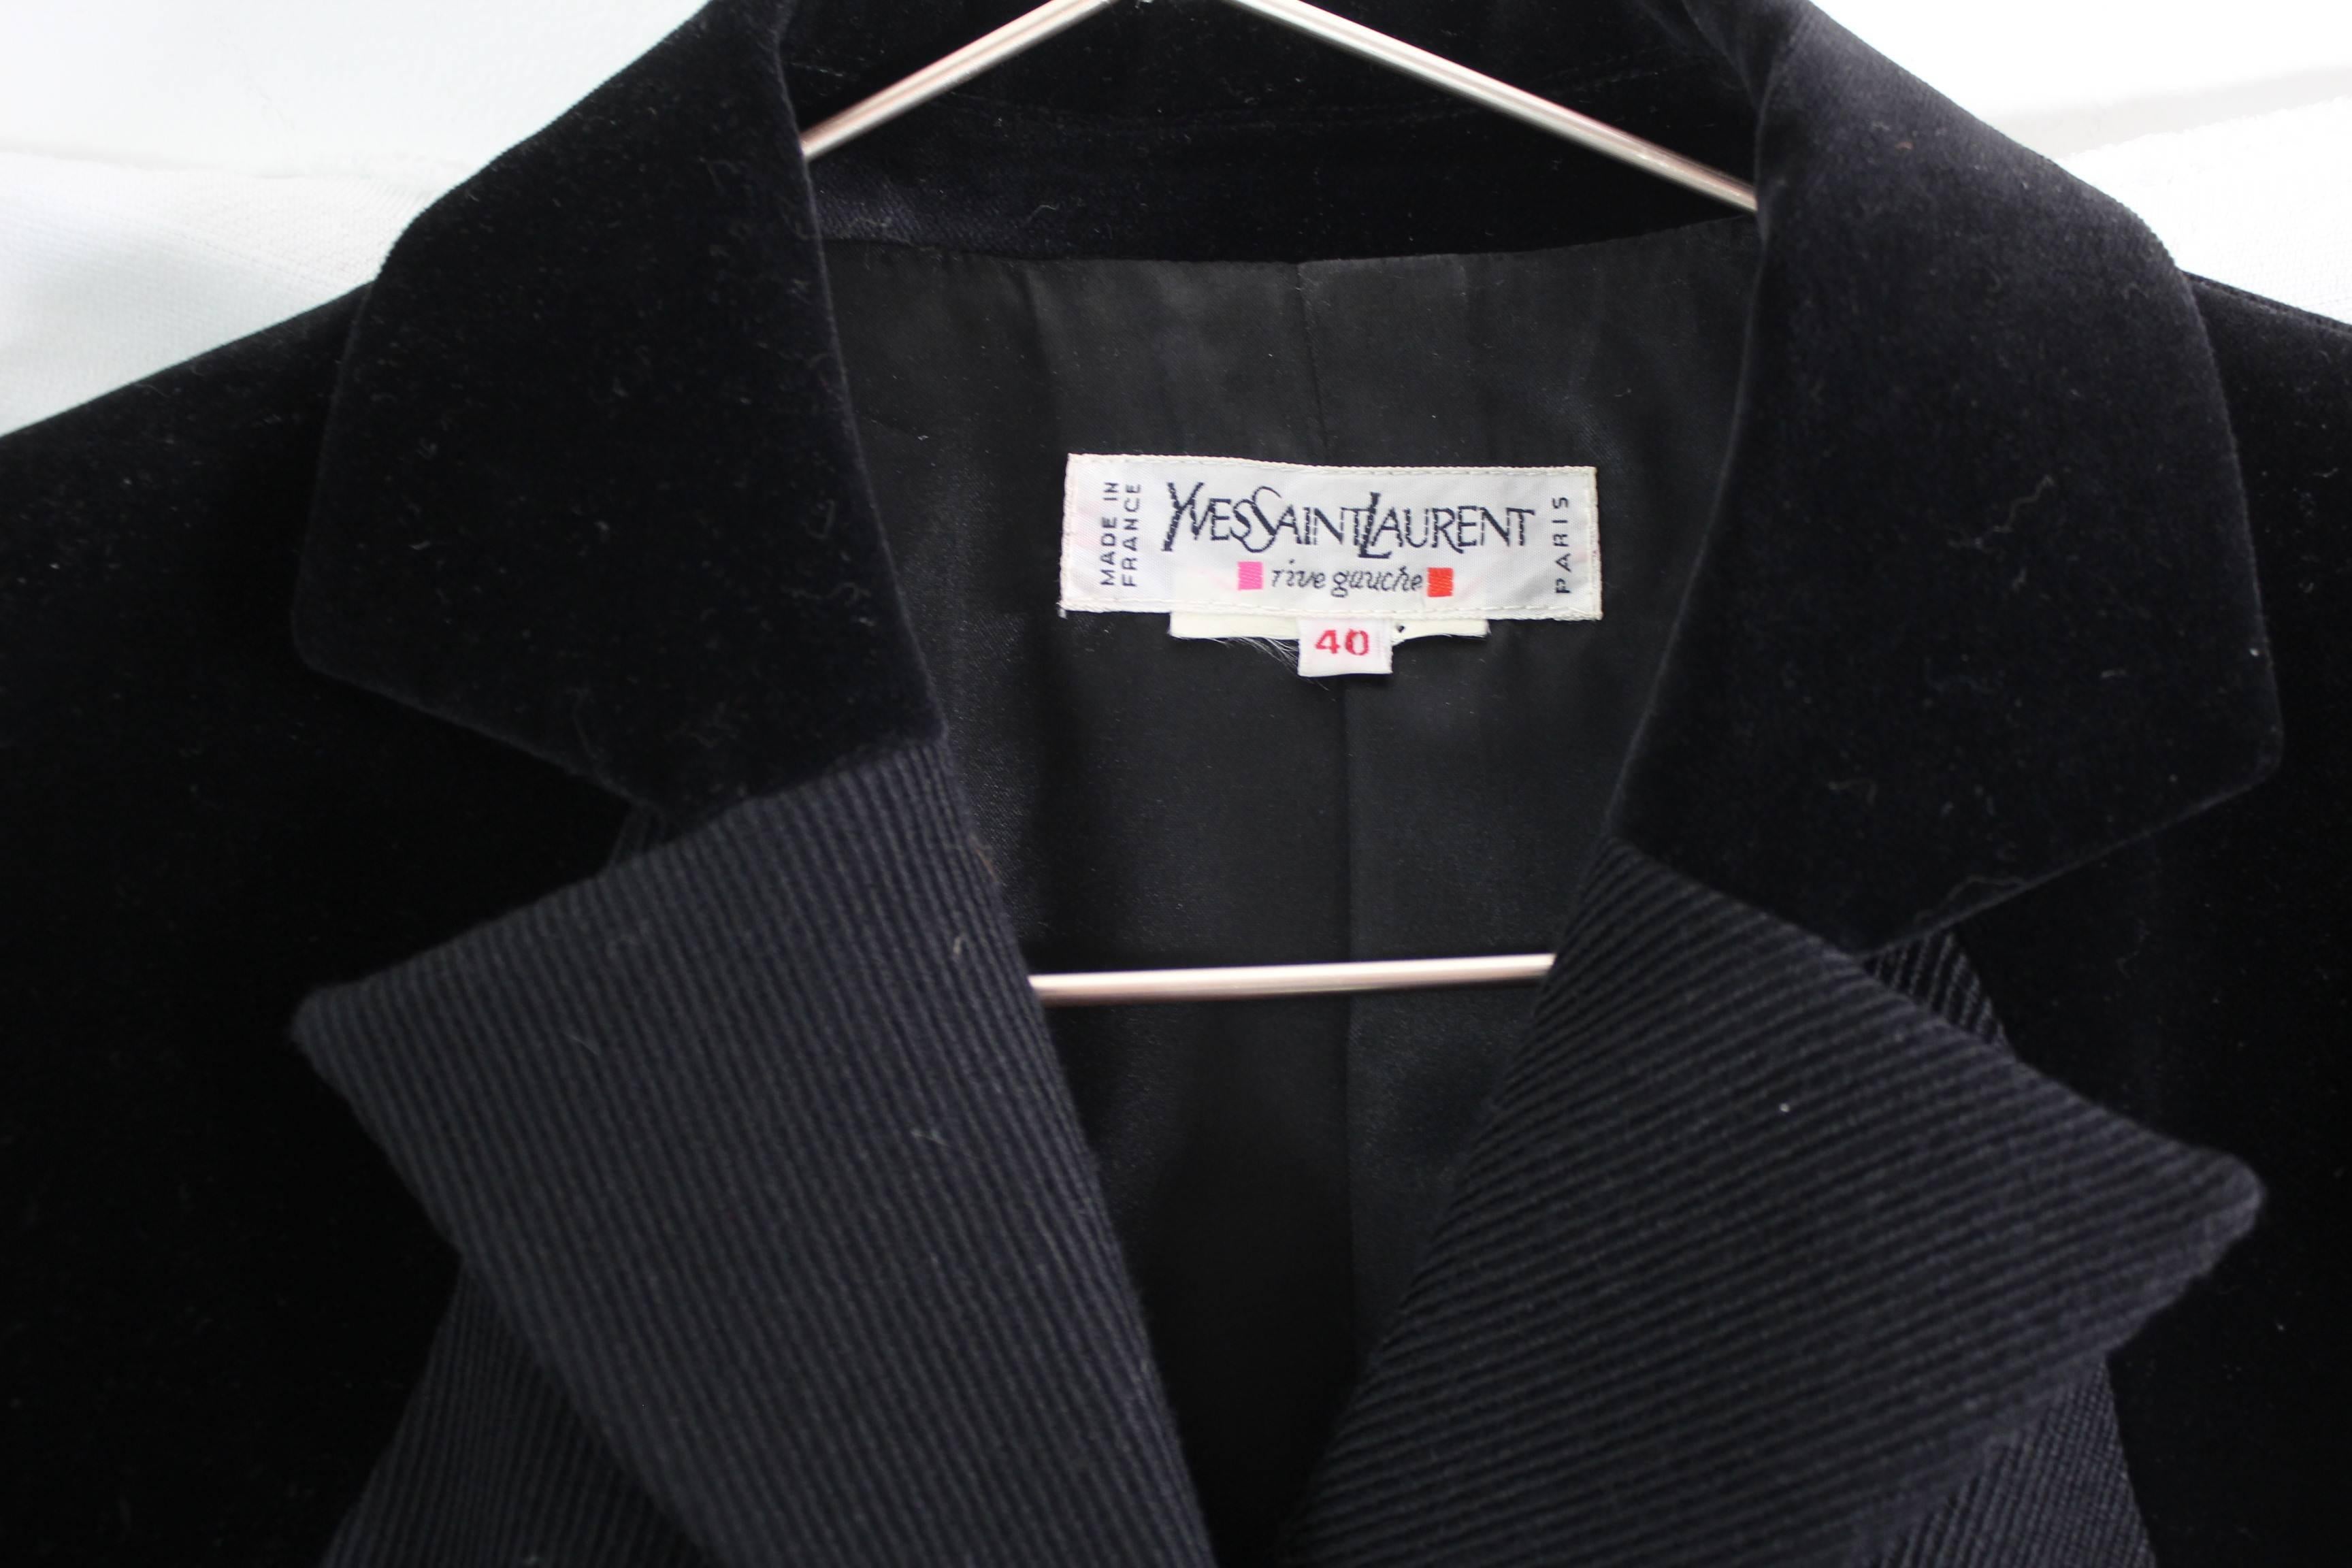 Nice Vintage Yves saint Laurent jacket in Wool and velvet.

Size FFr 440

Really good condition